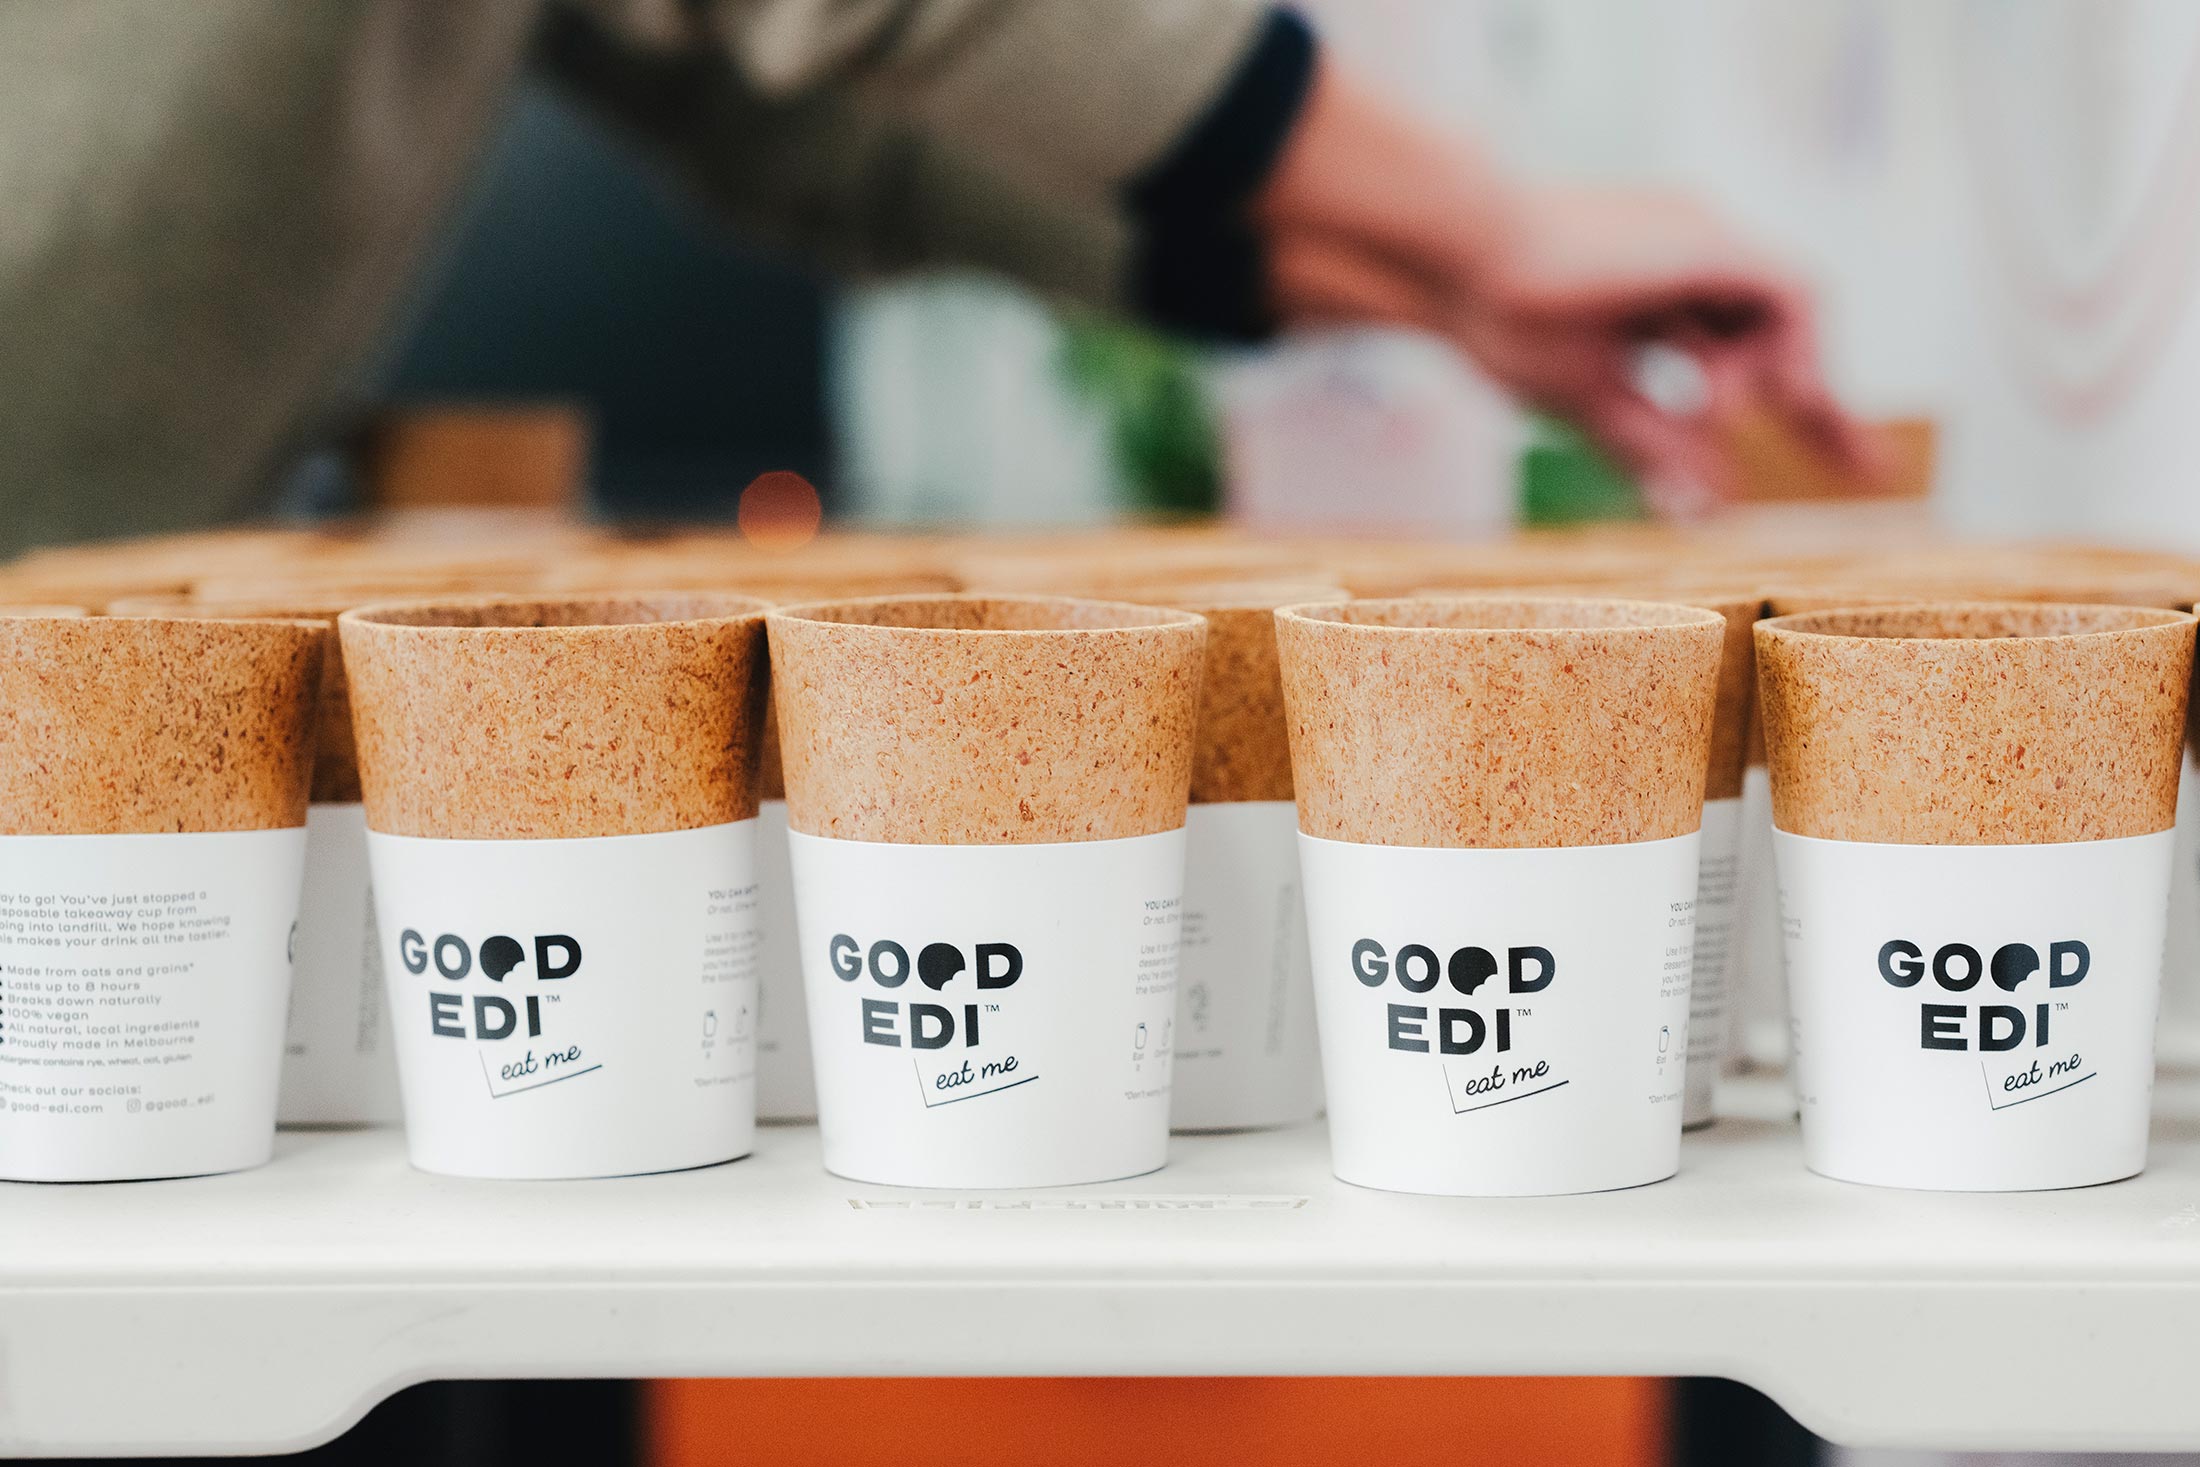 Edible Coffee Cups From Good-Edi Could Cut Environmental Waste - Bloomberg